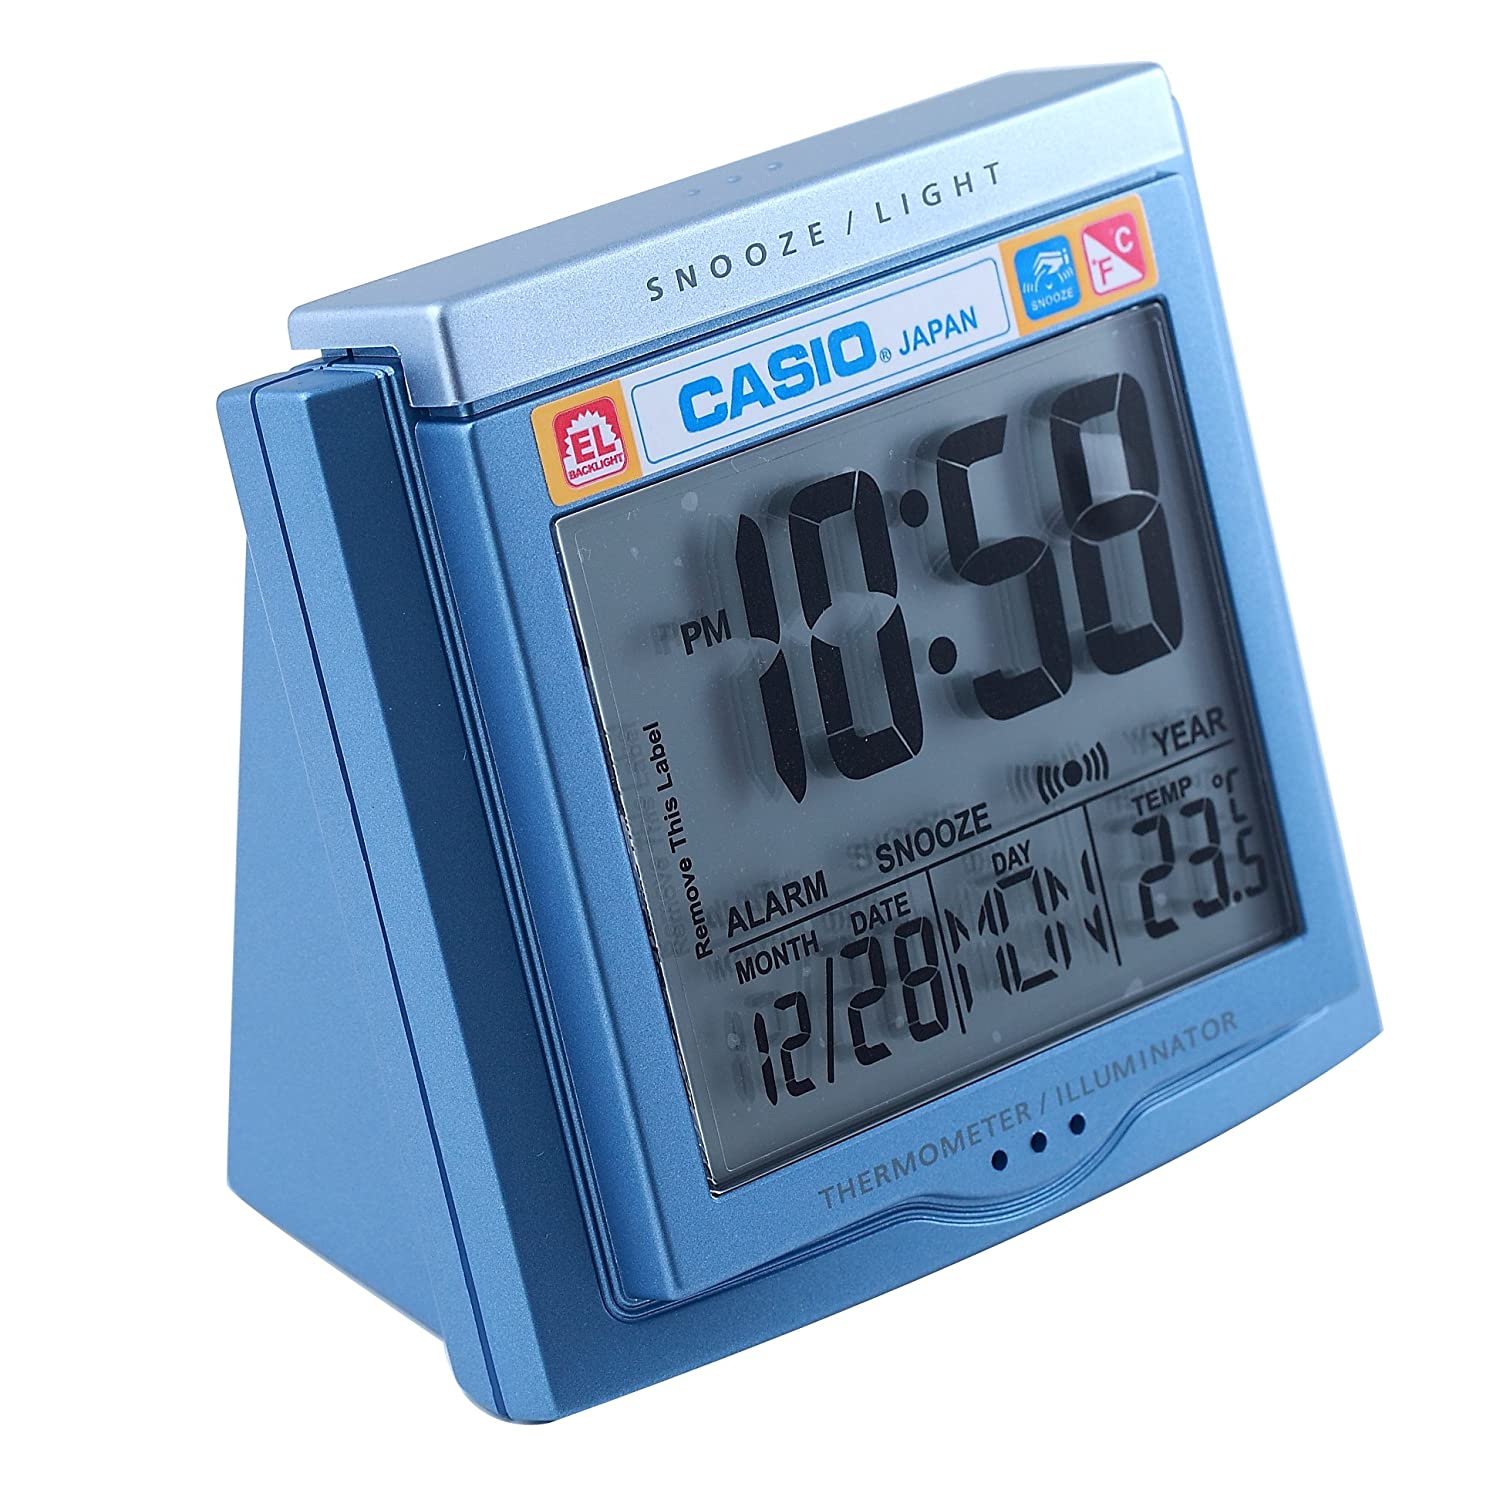 Casio Alarm Desk Clock DQ-750F-2DF | Reliable Timekeeping | Travel | Wake Up Routine | Snooze Function | Battery Operated | Portable | White Face | Halabh.com